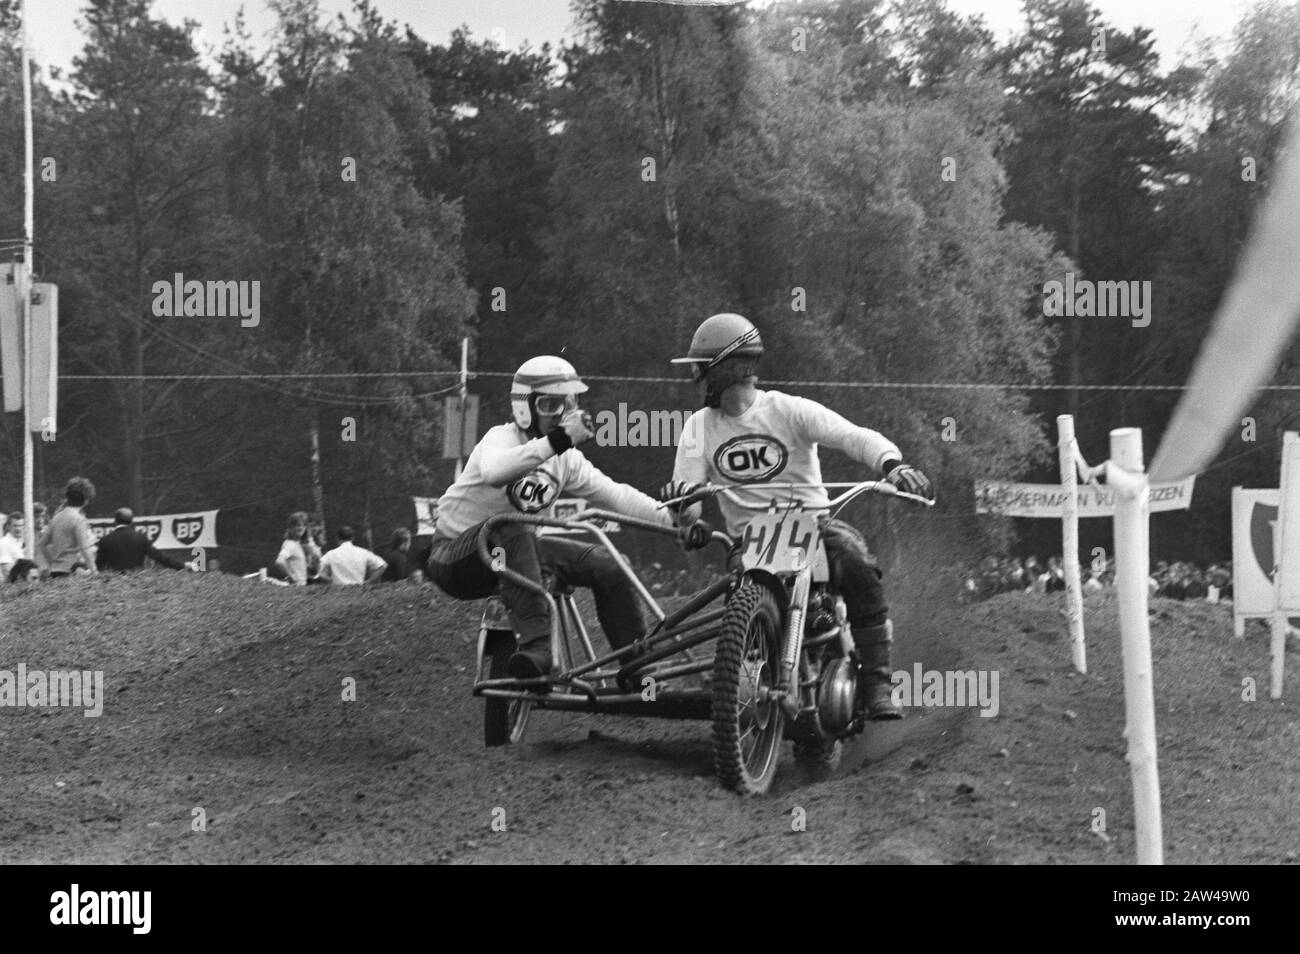 Grand Prix 250cc Motocross Race time with sidecar Date: May 7, 1972 ...